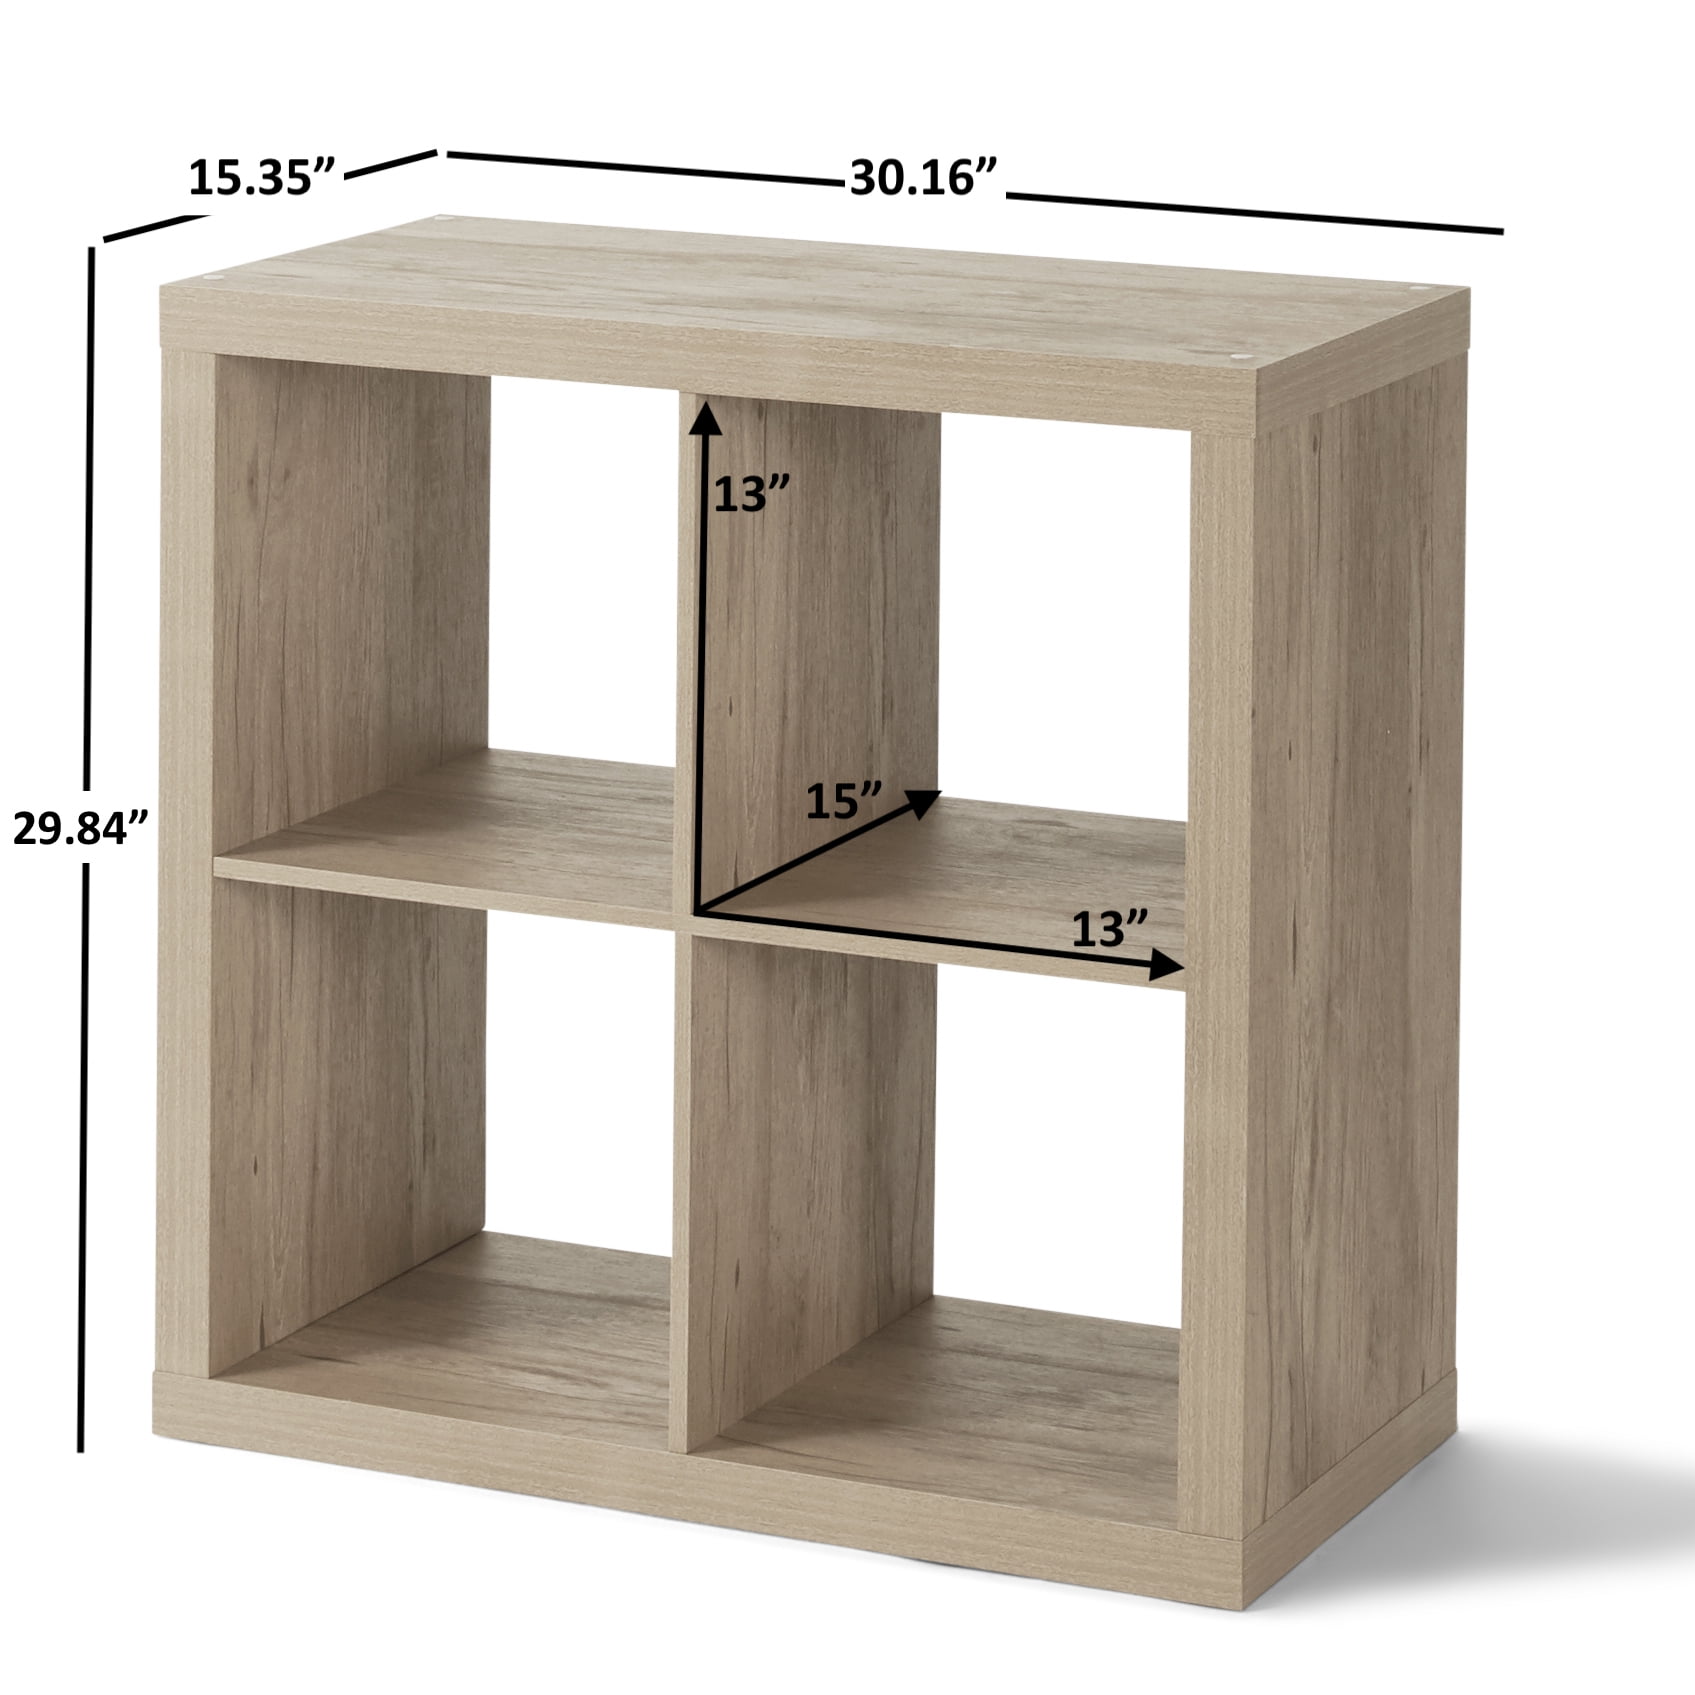 RIIPOO Storage Cube Shelves, 4-Cube Organizer Shelf for Bedroom Closet,  5-Layer Small Bookshelf, Bookcase Unit for Small Spaces